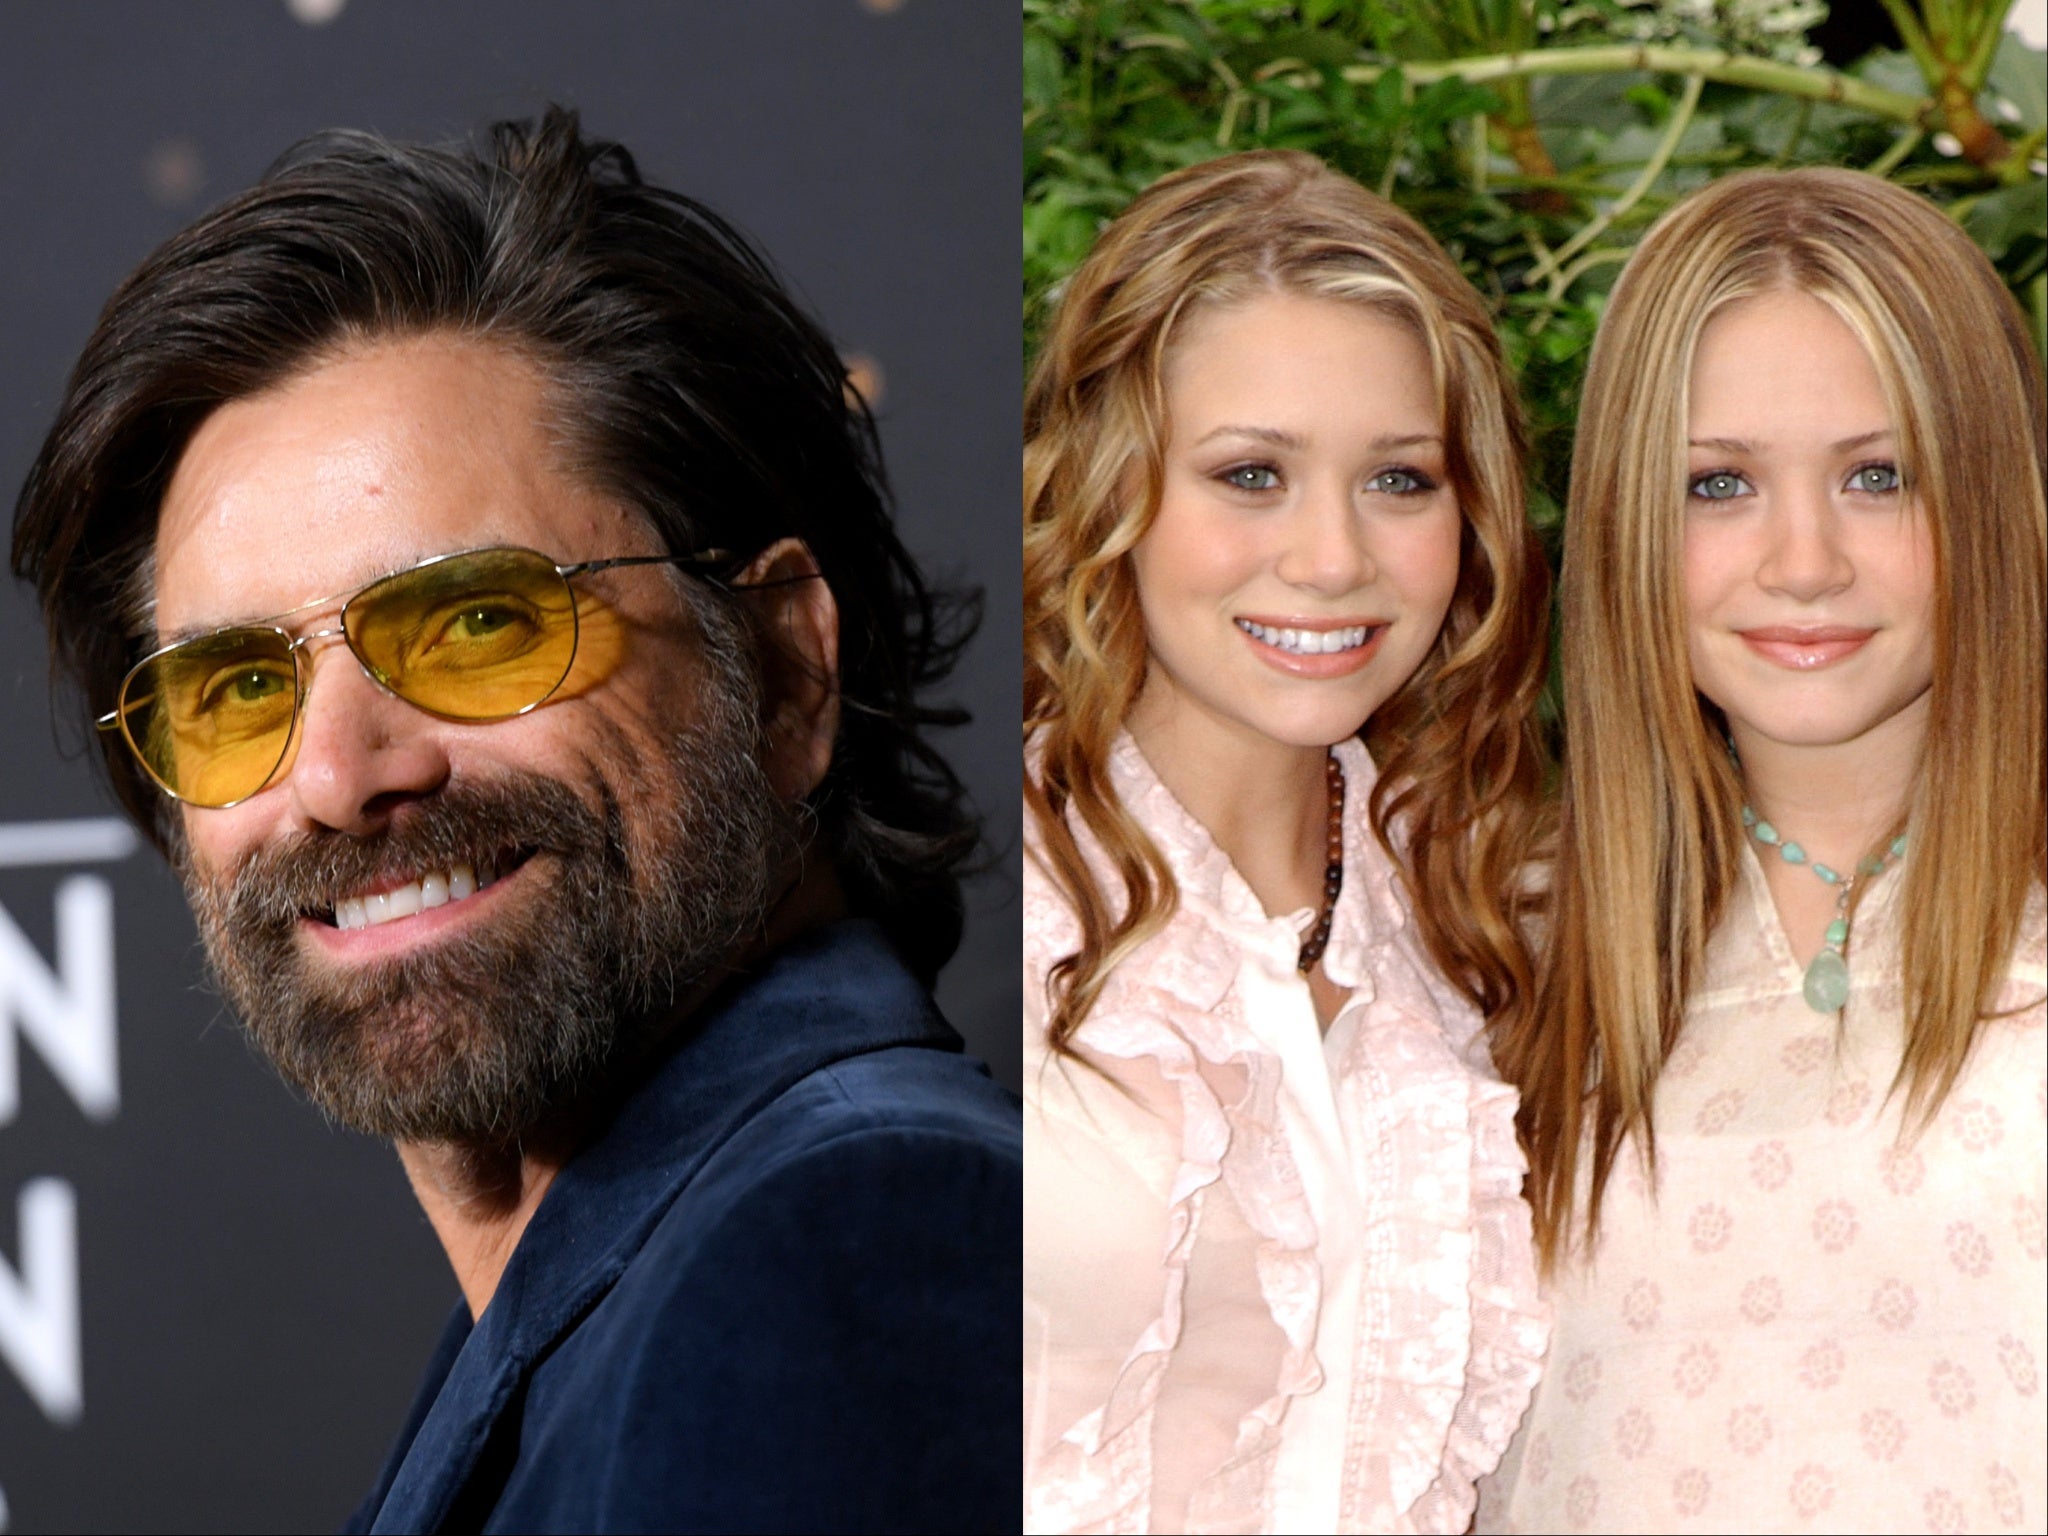 mary kate and ashley olsen then and now